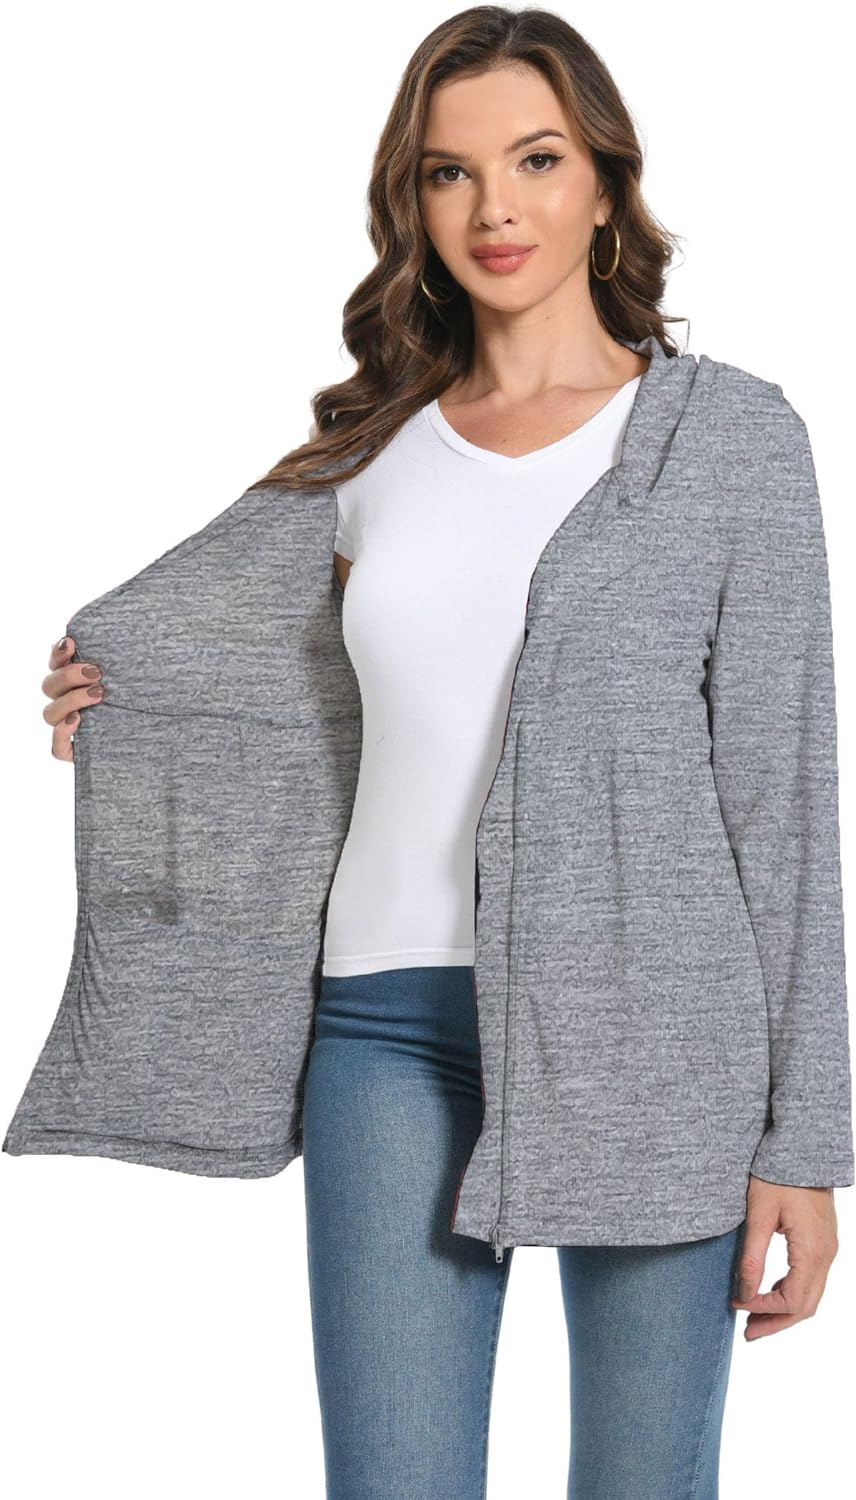 Post Mastectomy Shirts with Drain Pockets Breast Recovery Must Haves Soft Comfortable Long Sleeve Zip Up Hoodies